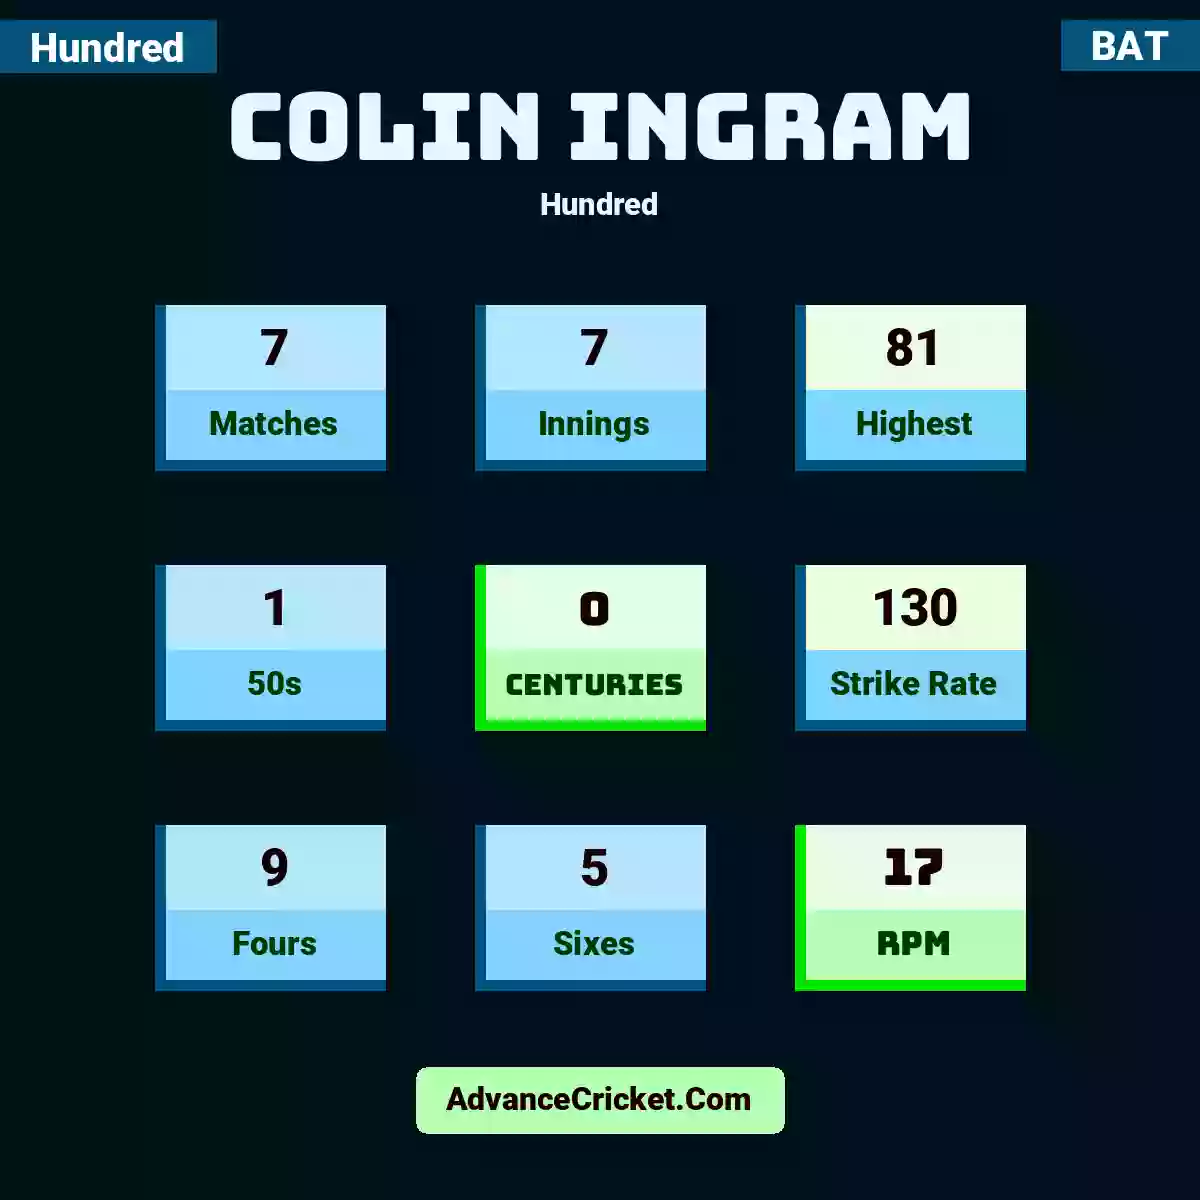 Colin Ingram Hundred , Colin Ingram played 7 matches, scored 81 runs as highest, 1 half-centuries, and 0 centuries, with a strike rate of 130. C.Ingram hit 9 fours and 5 sixes, with an RPM of 17.